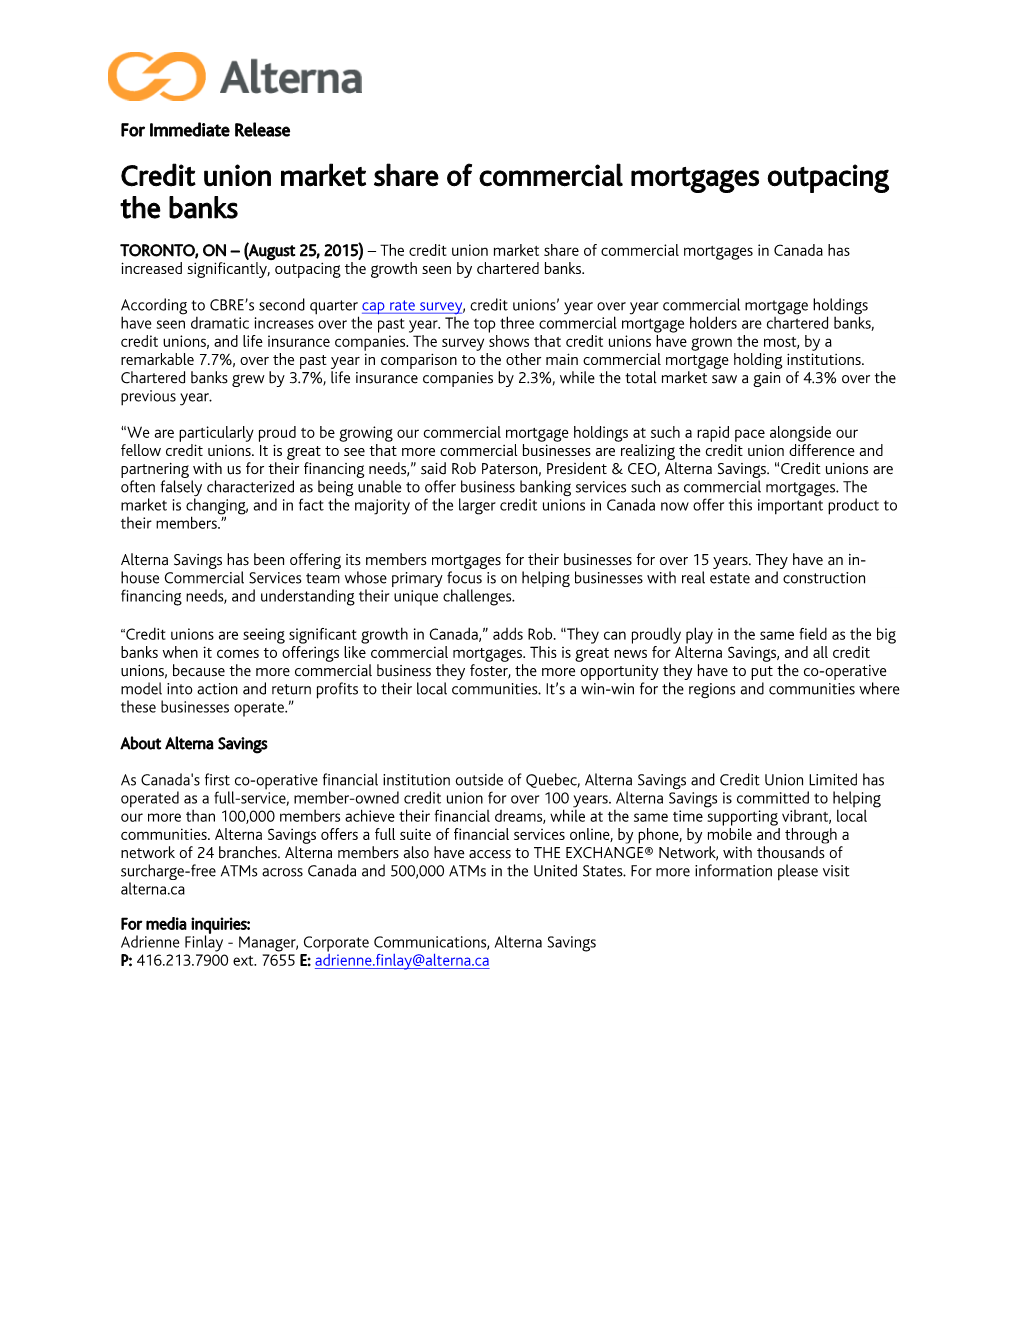 Credit Union Market Share of Commercial Mortgages Outpacing the Banks